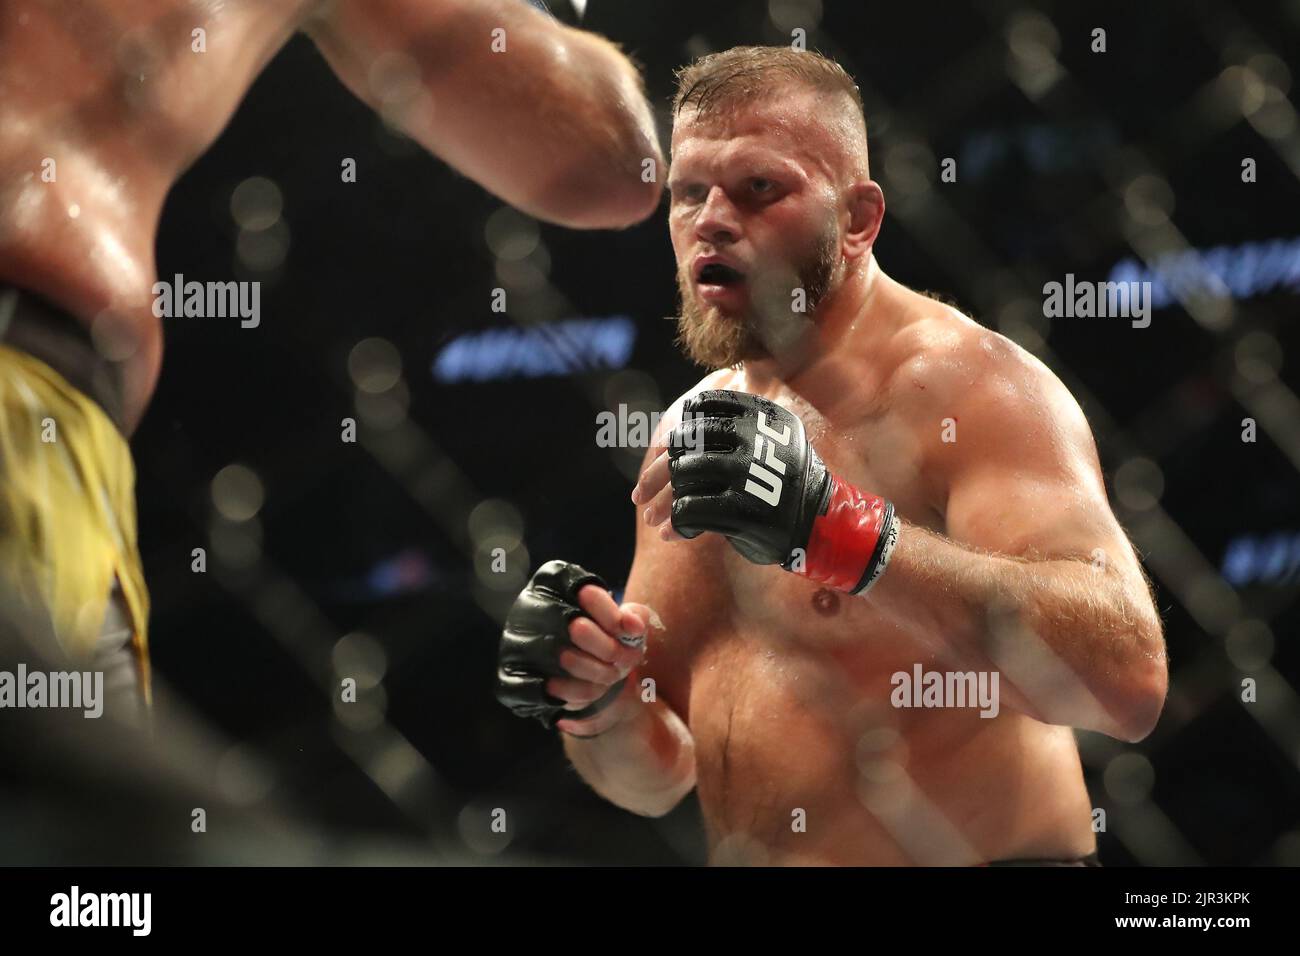 SALT LAKE CITY, UT - AUGUST 20: Marcin Tybura and Alexandr Romanov meet in the octagon for their Heavyweight bout at UFC 278 at the Vivint Arena on August 20, 2022 in Salt Lake City, Utah, United States. (Photo by Alejandro Salazar/PxImages) Stock Photo